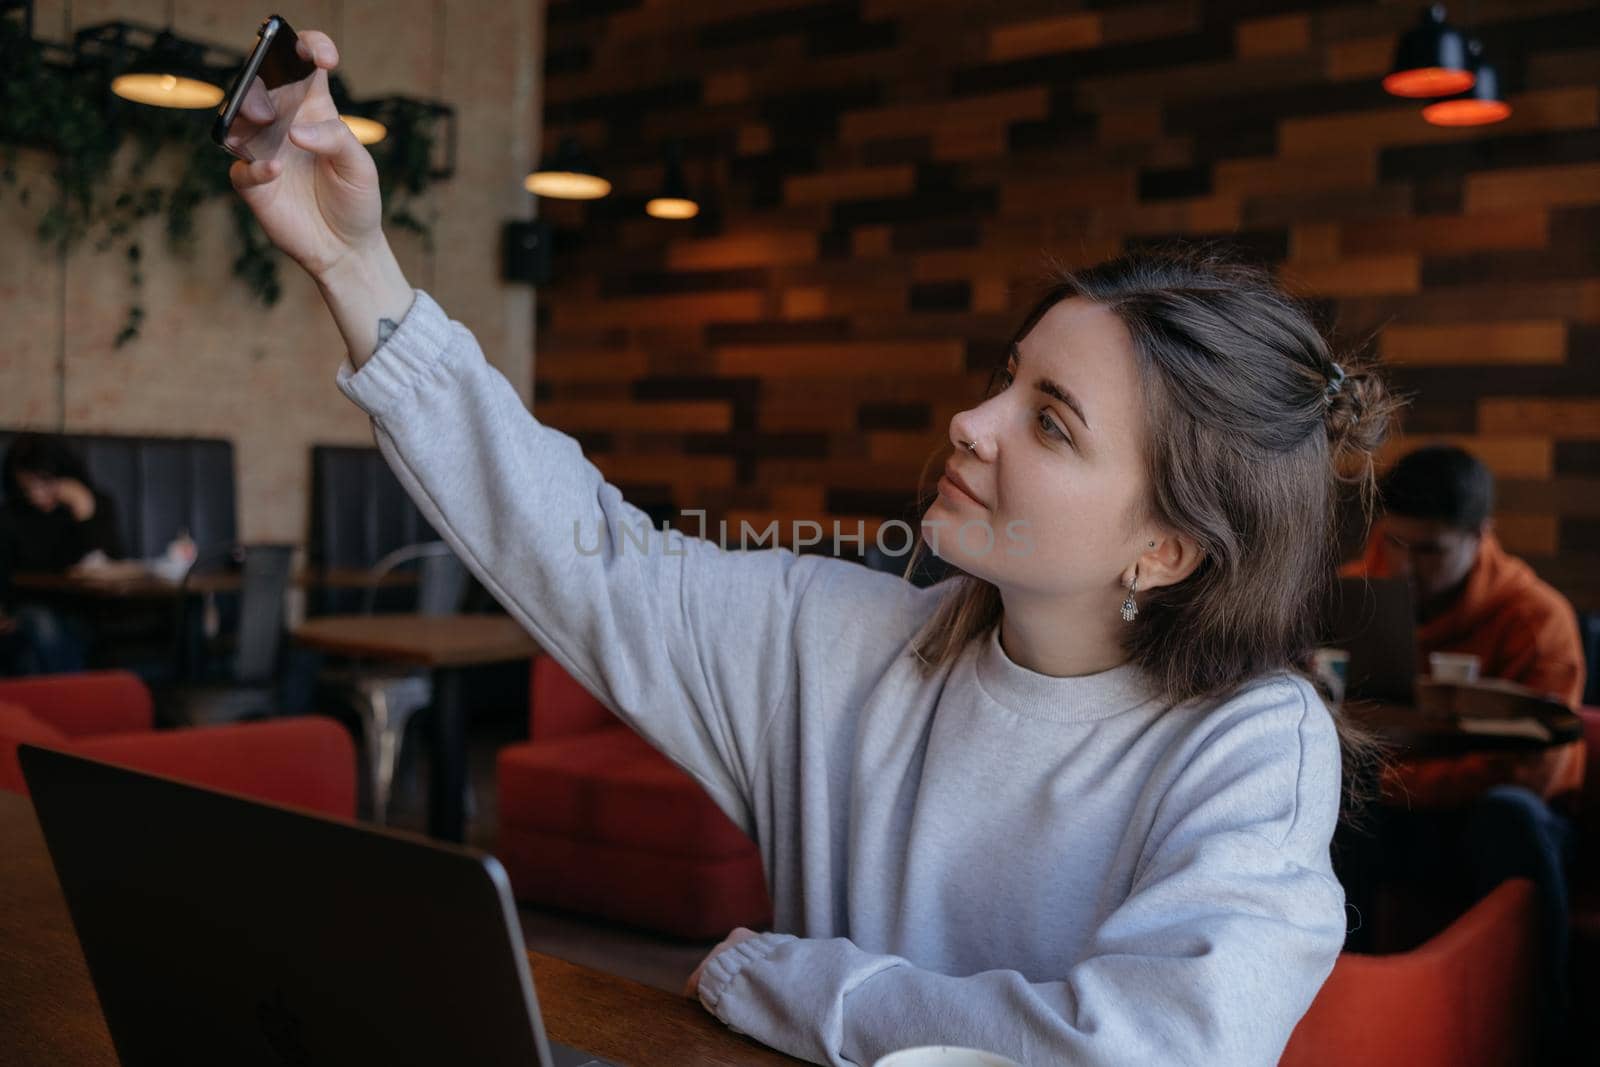 Smiling woman sitting on kitchen sofa talking by videocall dating online looking at phone. Video blogger vlogger recording vlog at home. Lifestyle vlogging concept, head shot portrait